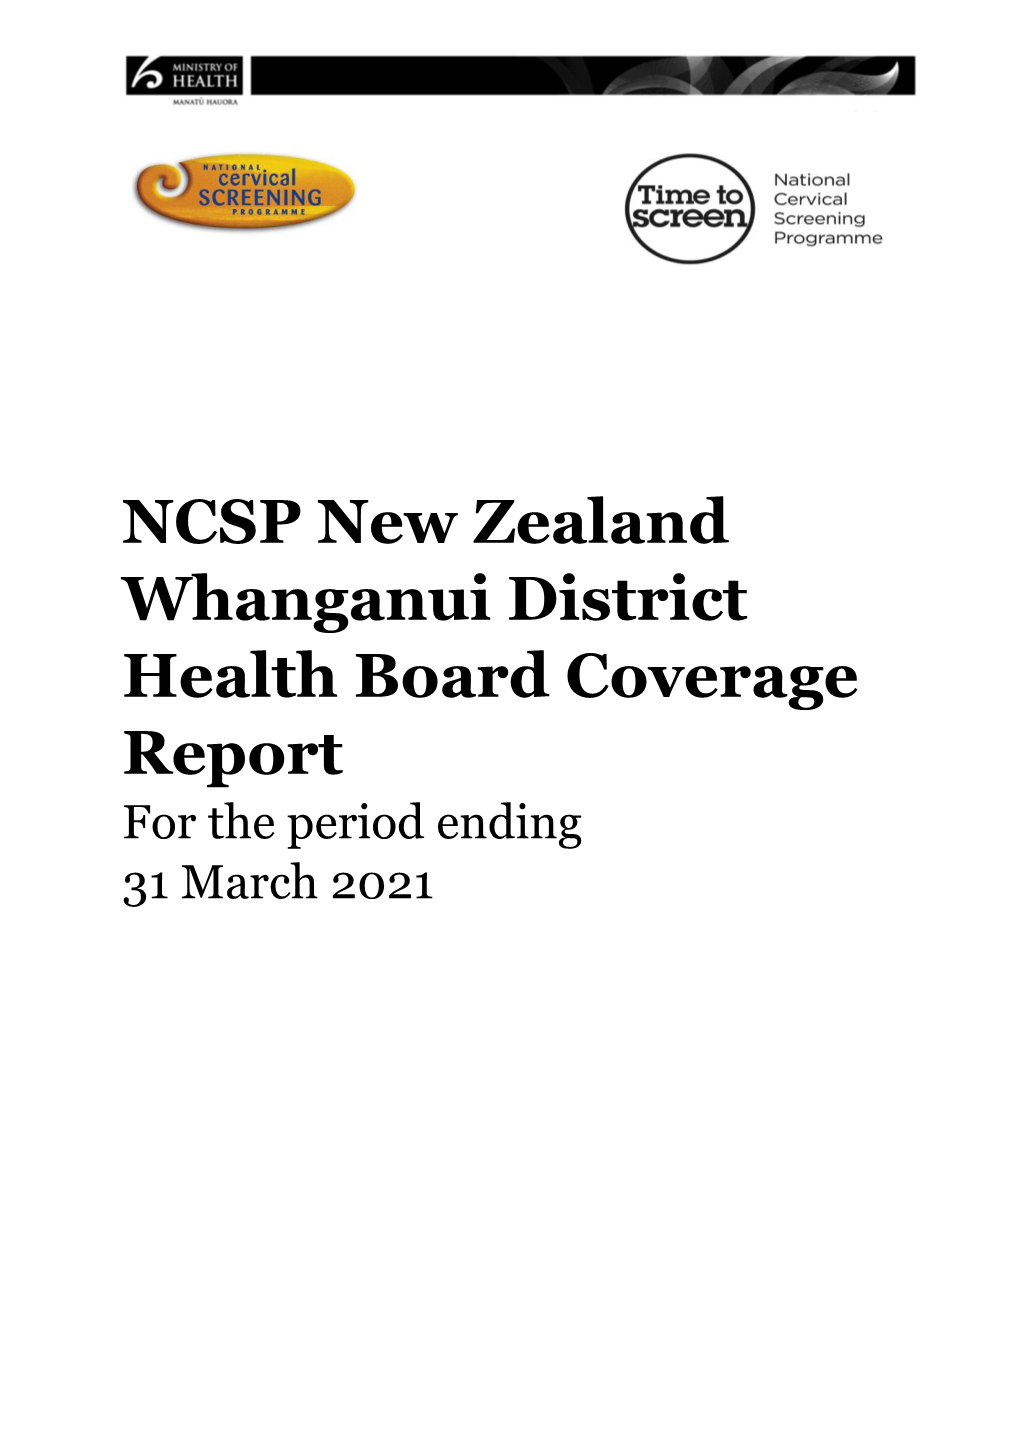 NCSP New Zealand Whanganui District Health Board Coverage Report for the Period Ending 31 March 2021